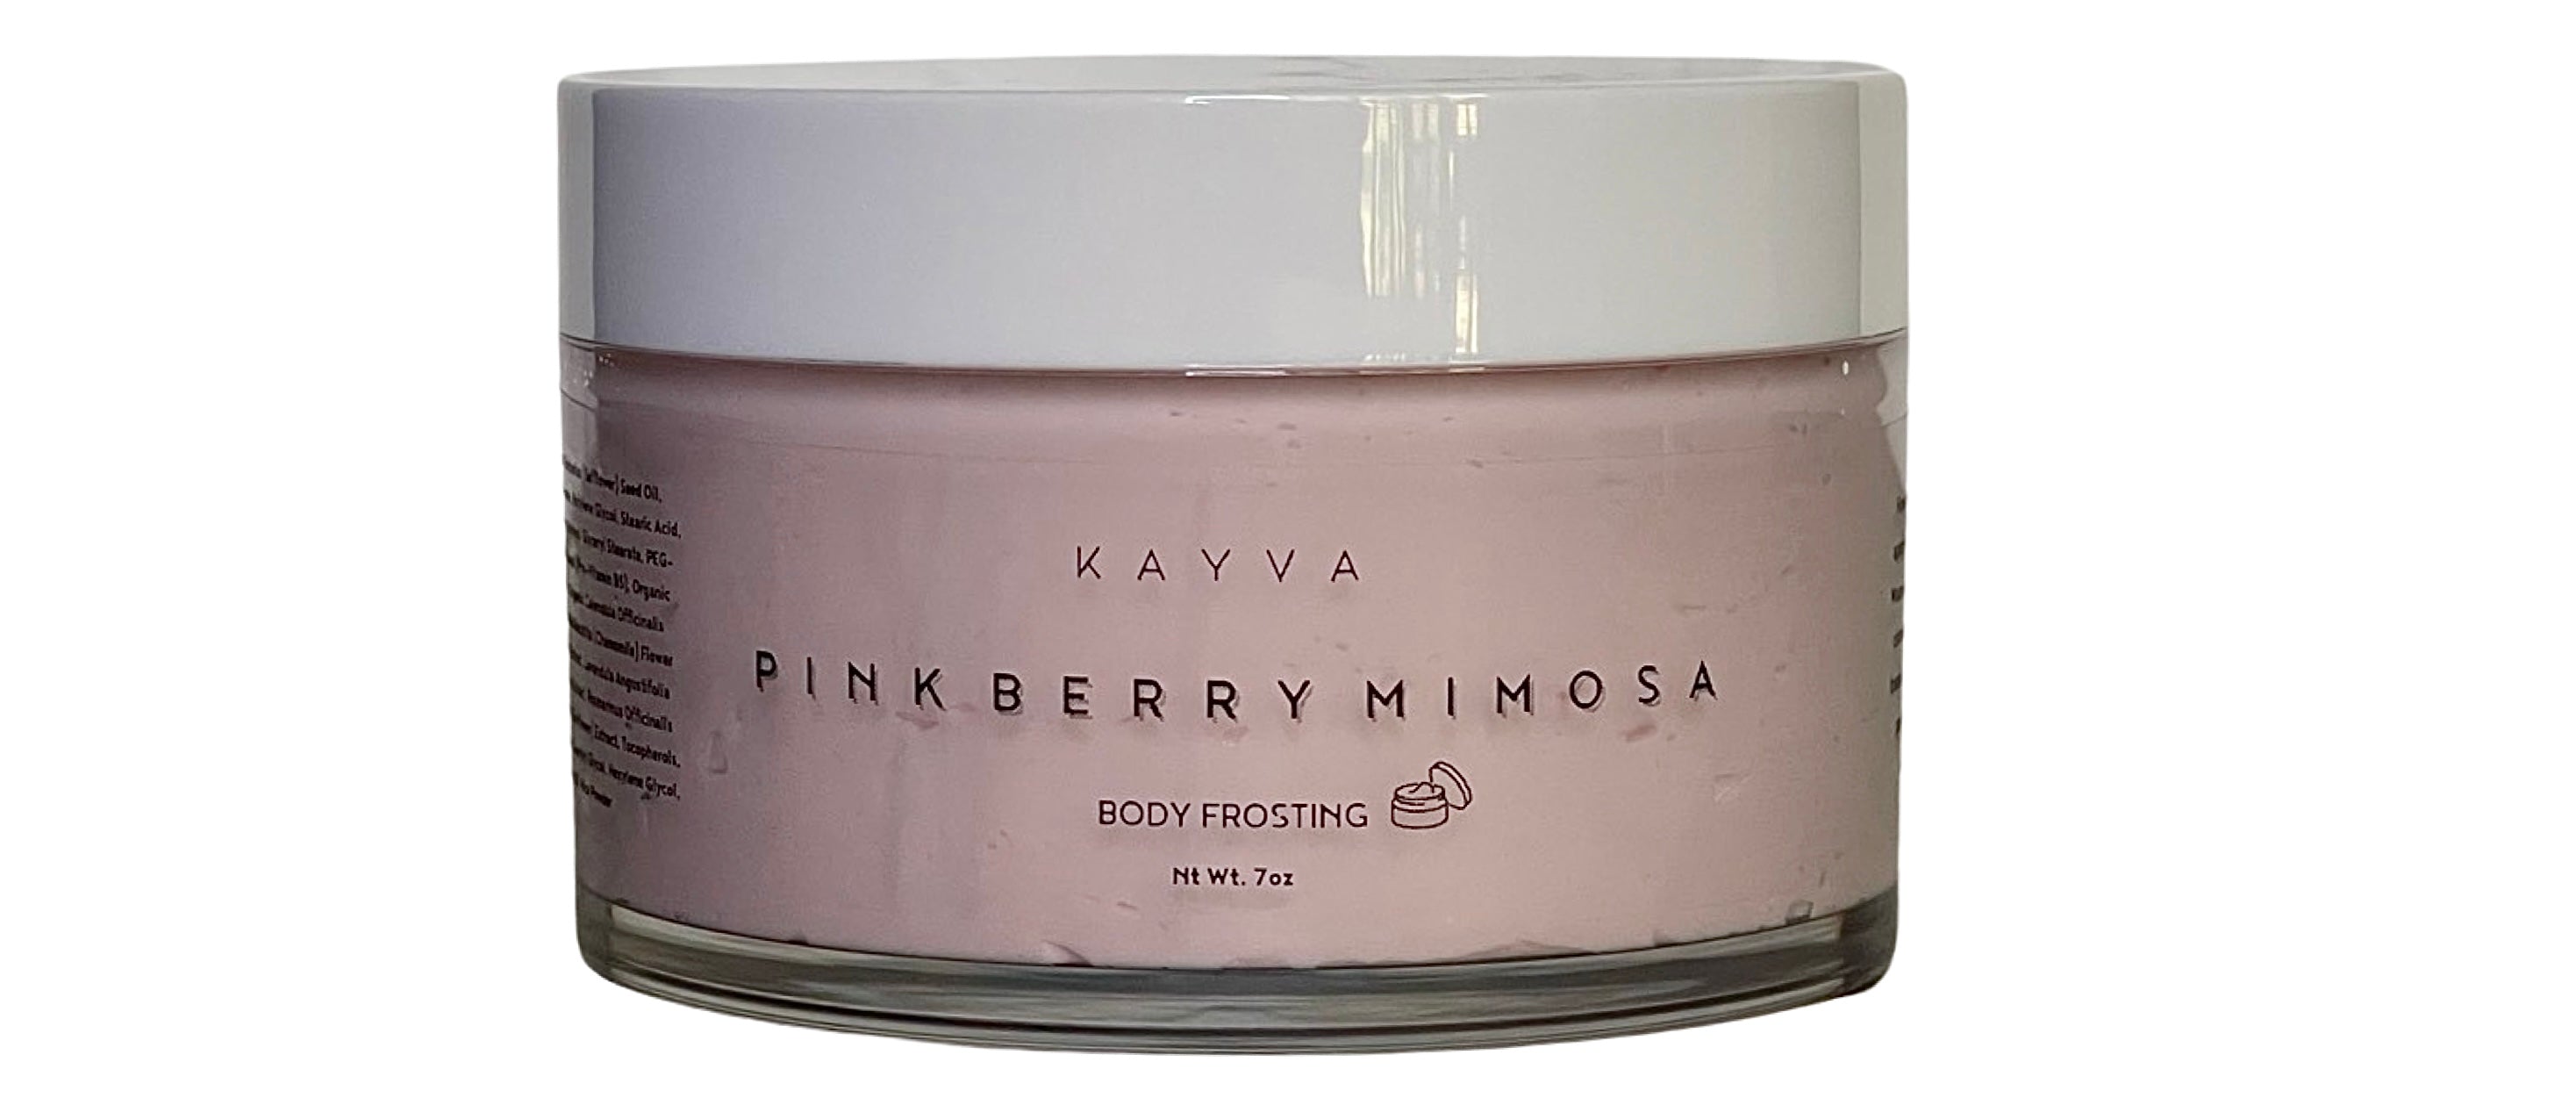 Pink Berry Mimosa Body Frosting